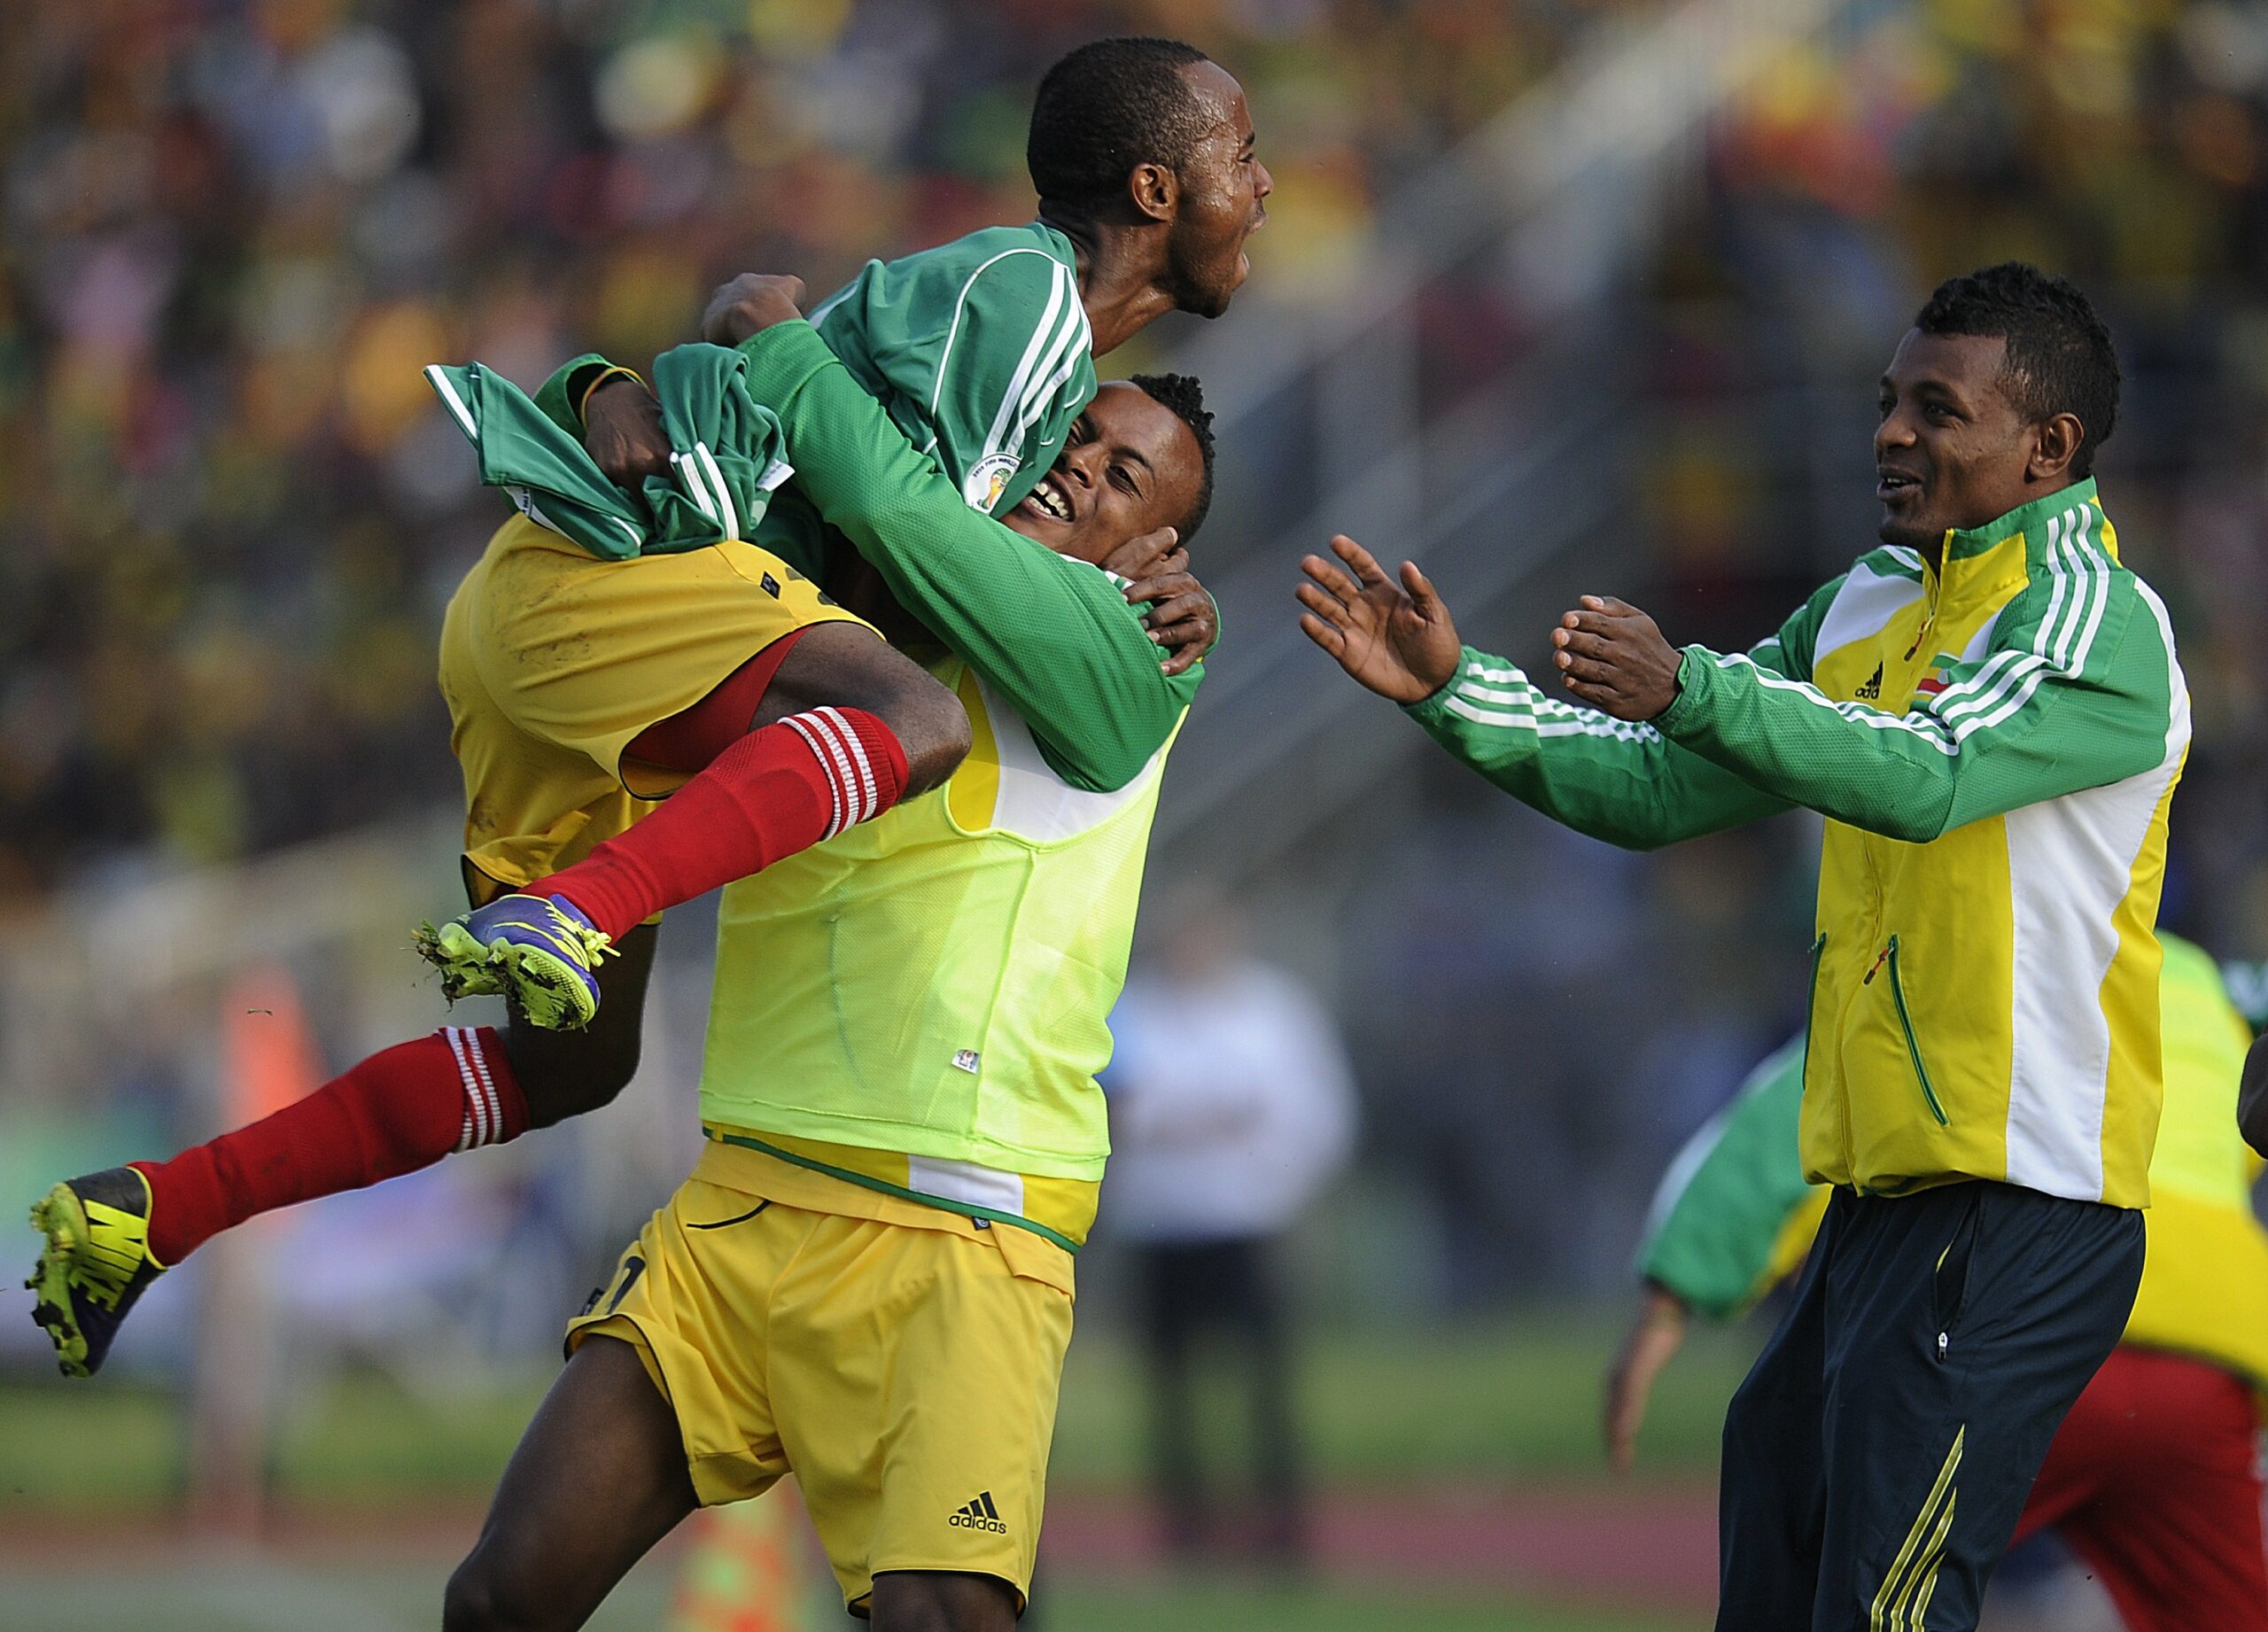 Ethiopian substitute players celebrate after scoring against Nigeria on October 13, 2013 during a 2014 World Cup qualifying match in Addis Ababa.    AFP PHOTO / SIMON MAINA